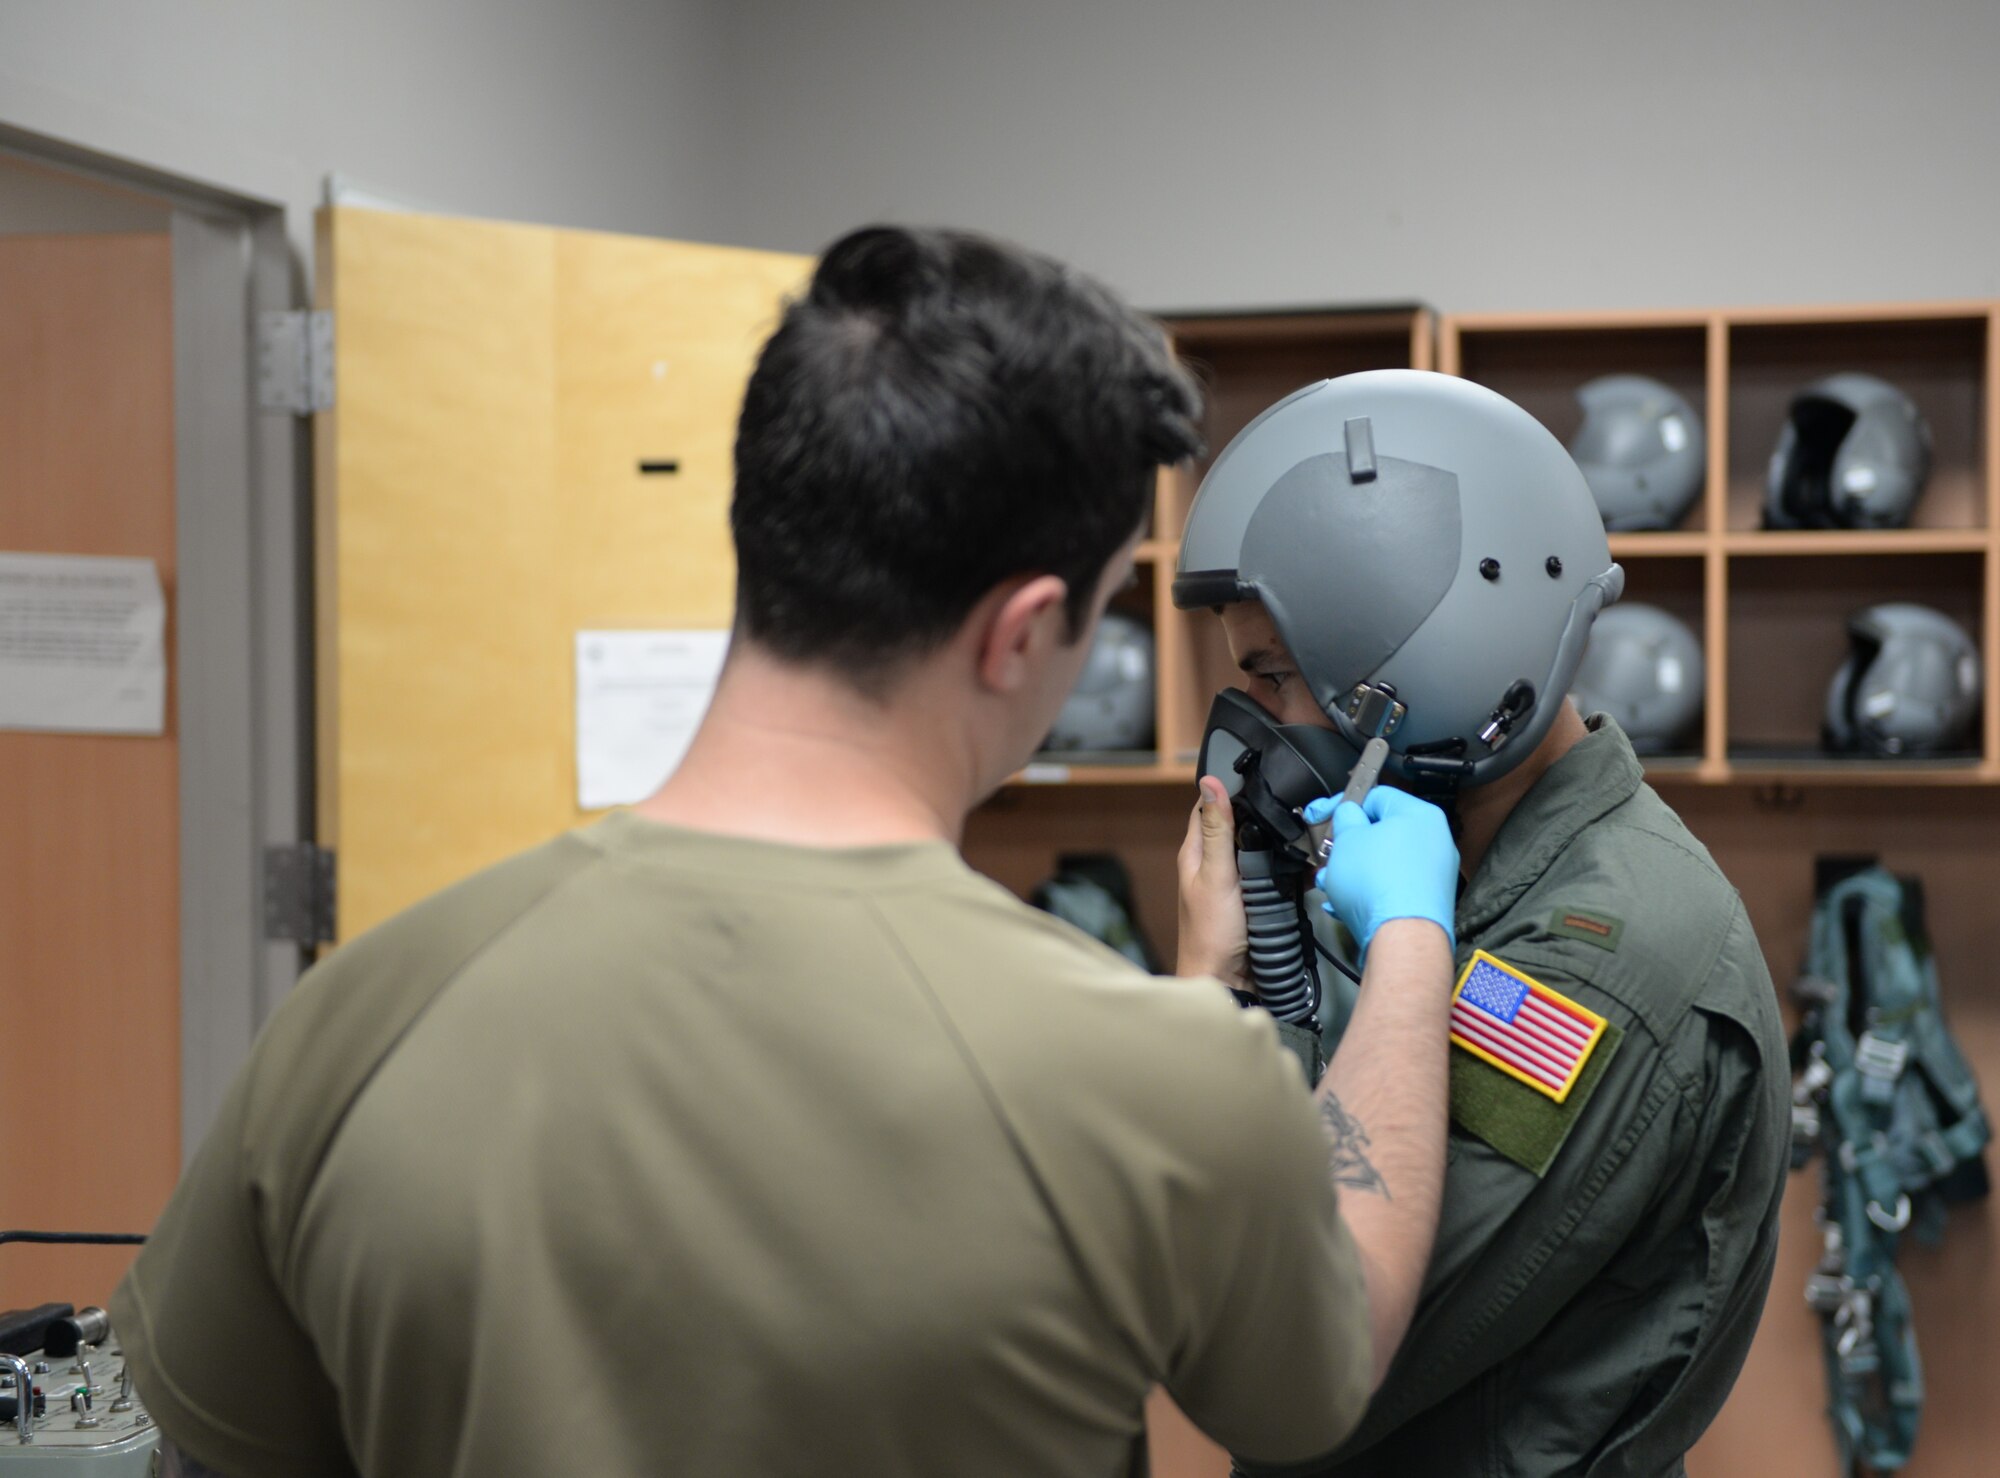 Second Lt. Steven Britt, 37th Flying Training Squadron student pilot, breathes through an oxegen mask, while –Senior Airman Dillon Arizta, 37th FTS Aircrew Flight Equipment specialist, makes sure the mask works properly on June 10, 2020, at Columbus Air Force Base, Miss. AFE specialists are responsible for ensuring that all flight and safety equipment is in perfect working order. (U.S. Air Force photo by Airman 1st Class Davis Donaldson)